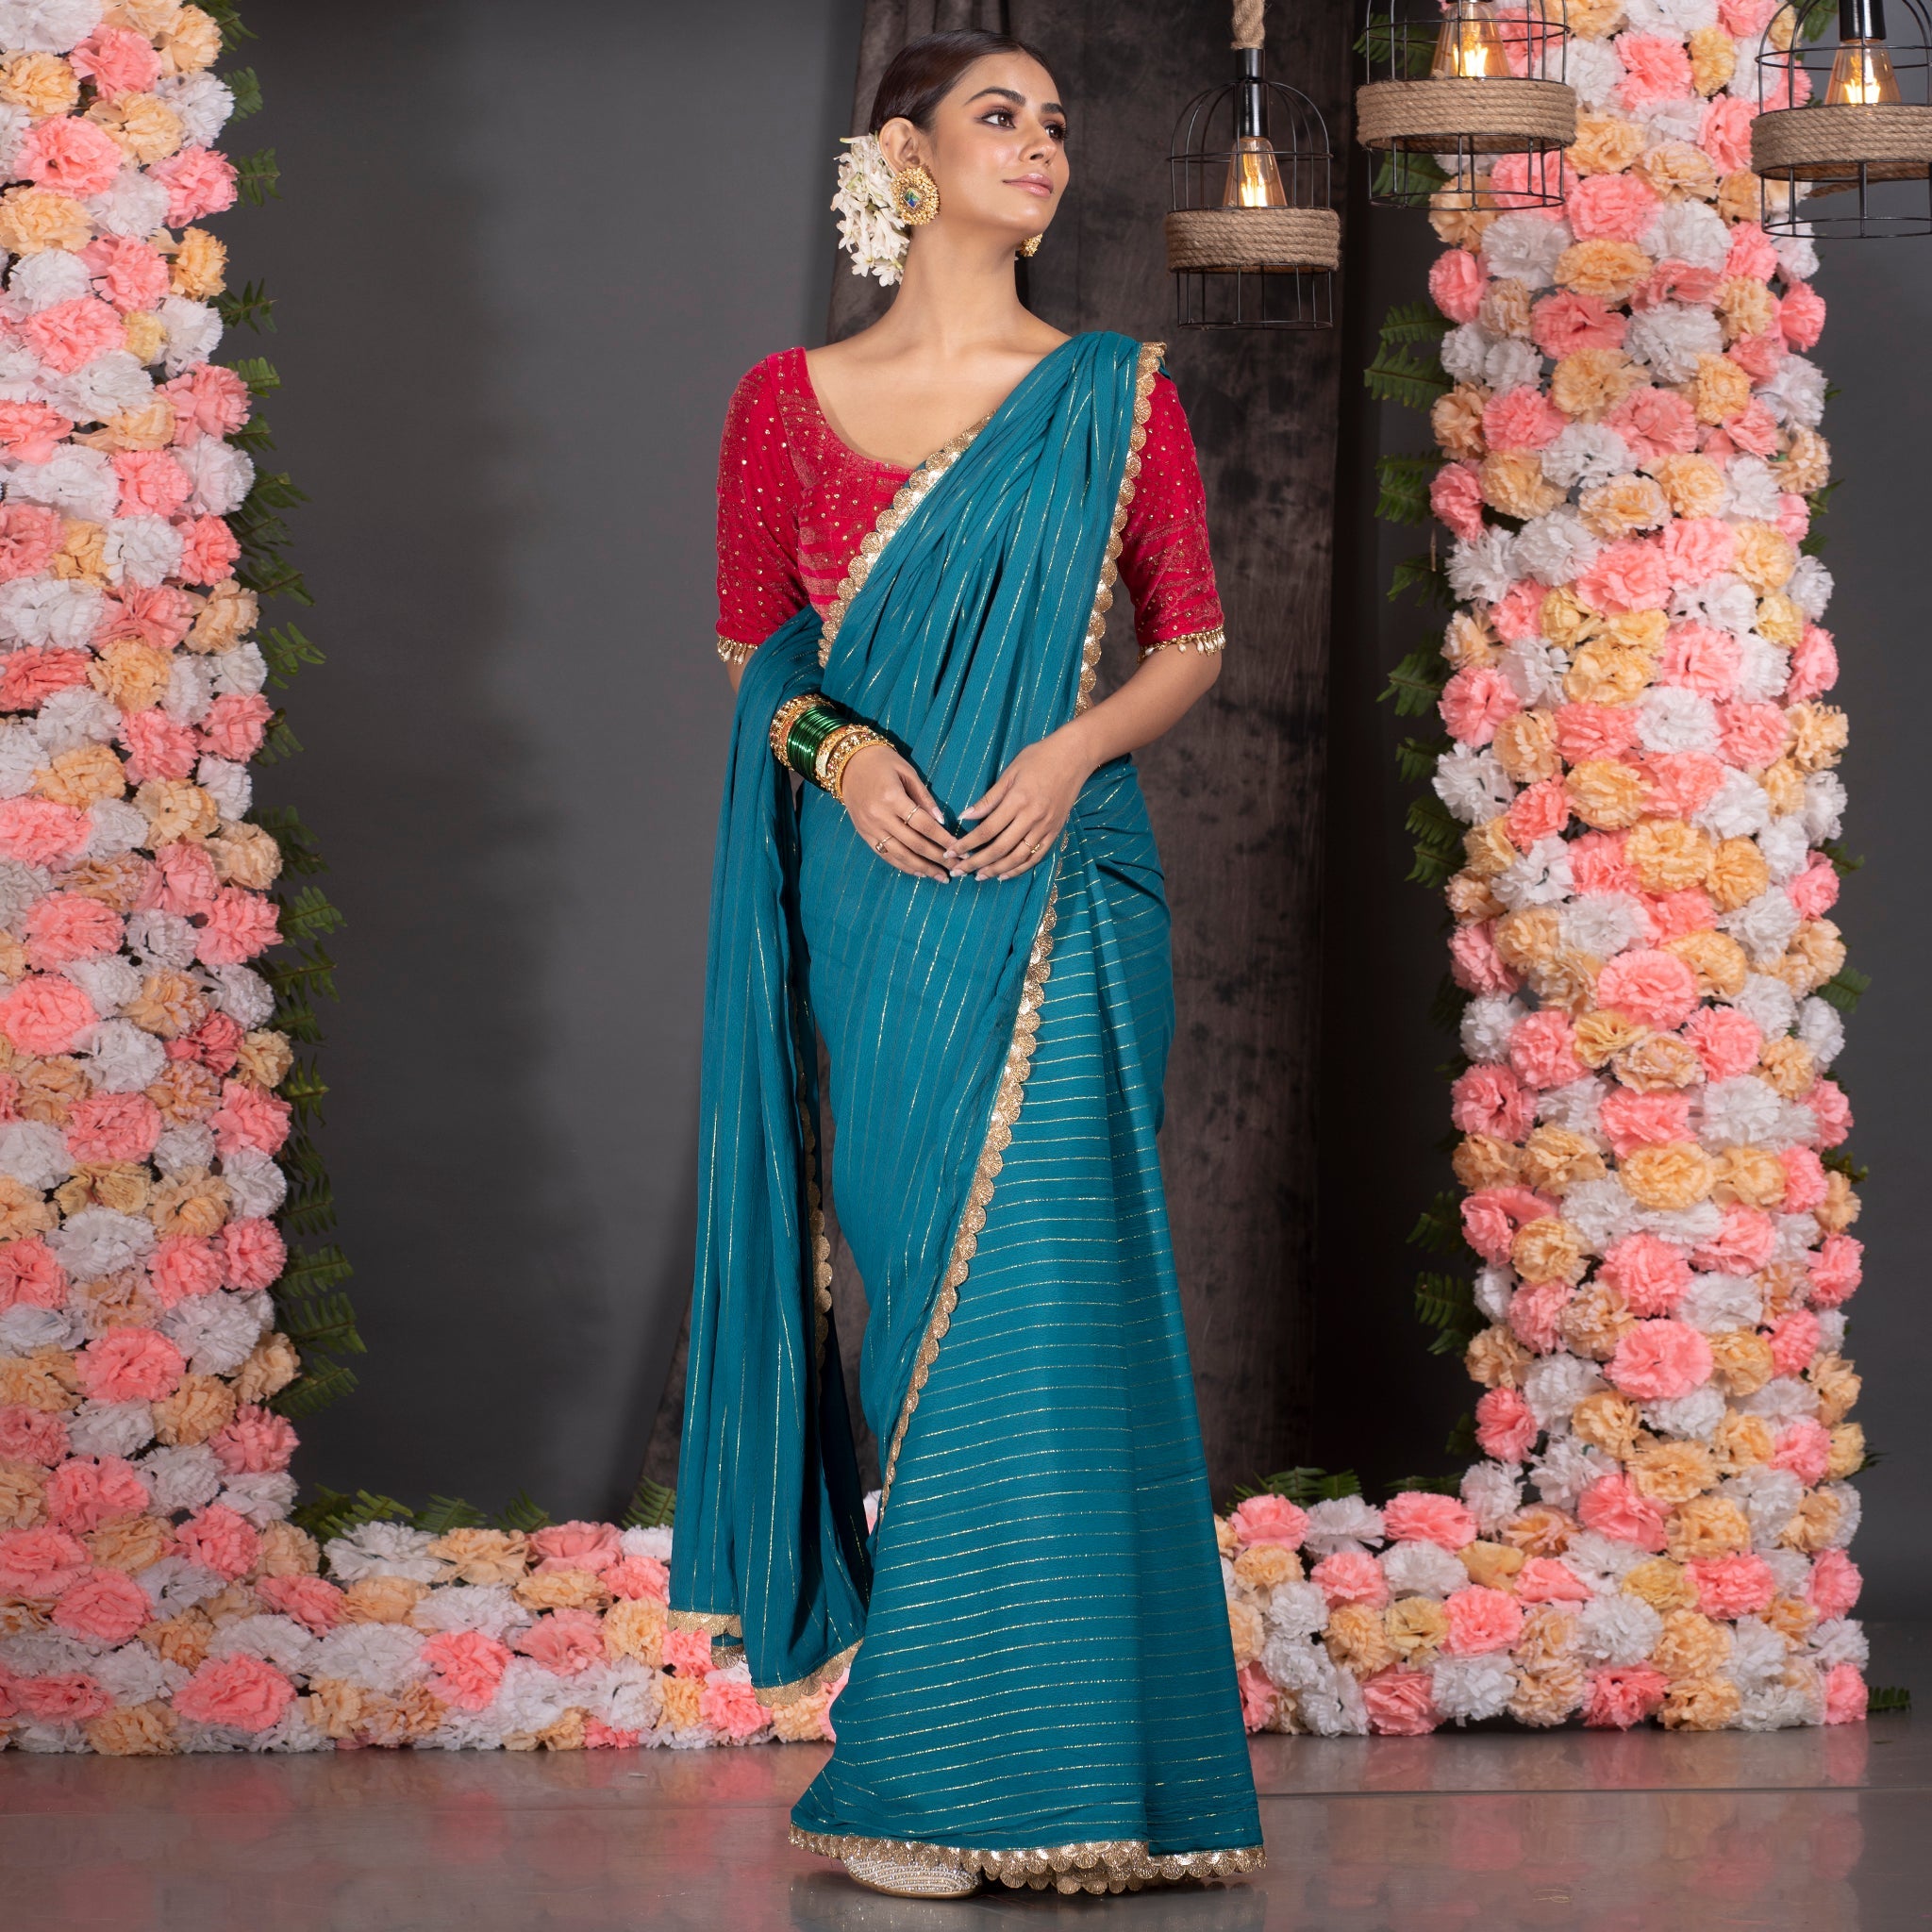 Women's Teal Blue Georgette Saree With Lurex Gold Stripes And Scallop Embroidered Border - Boveee